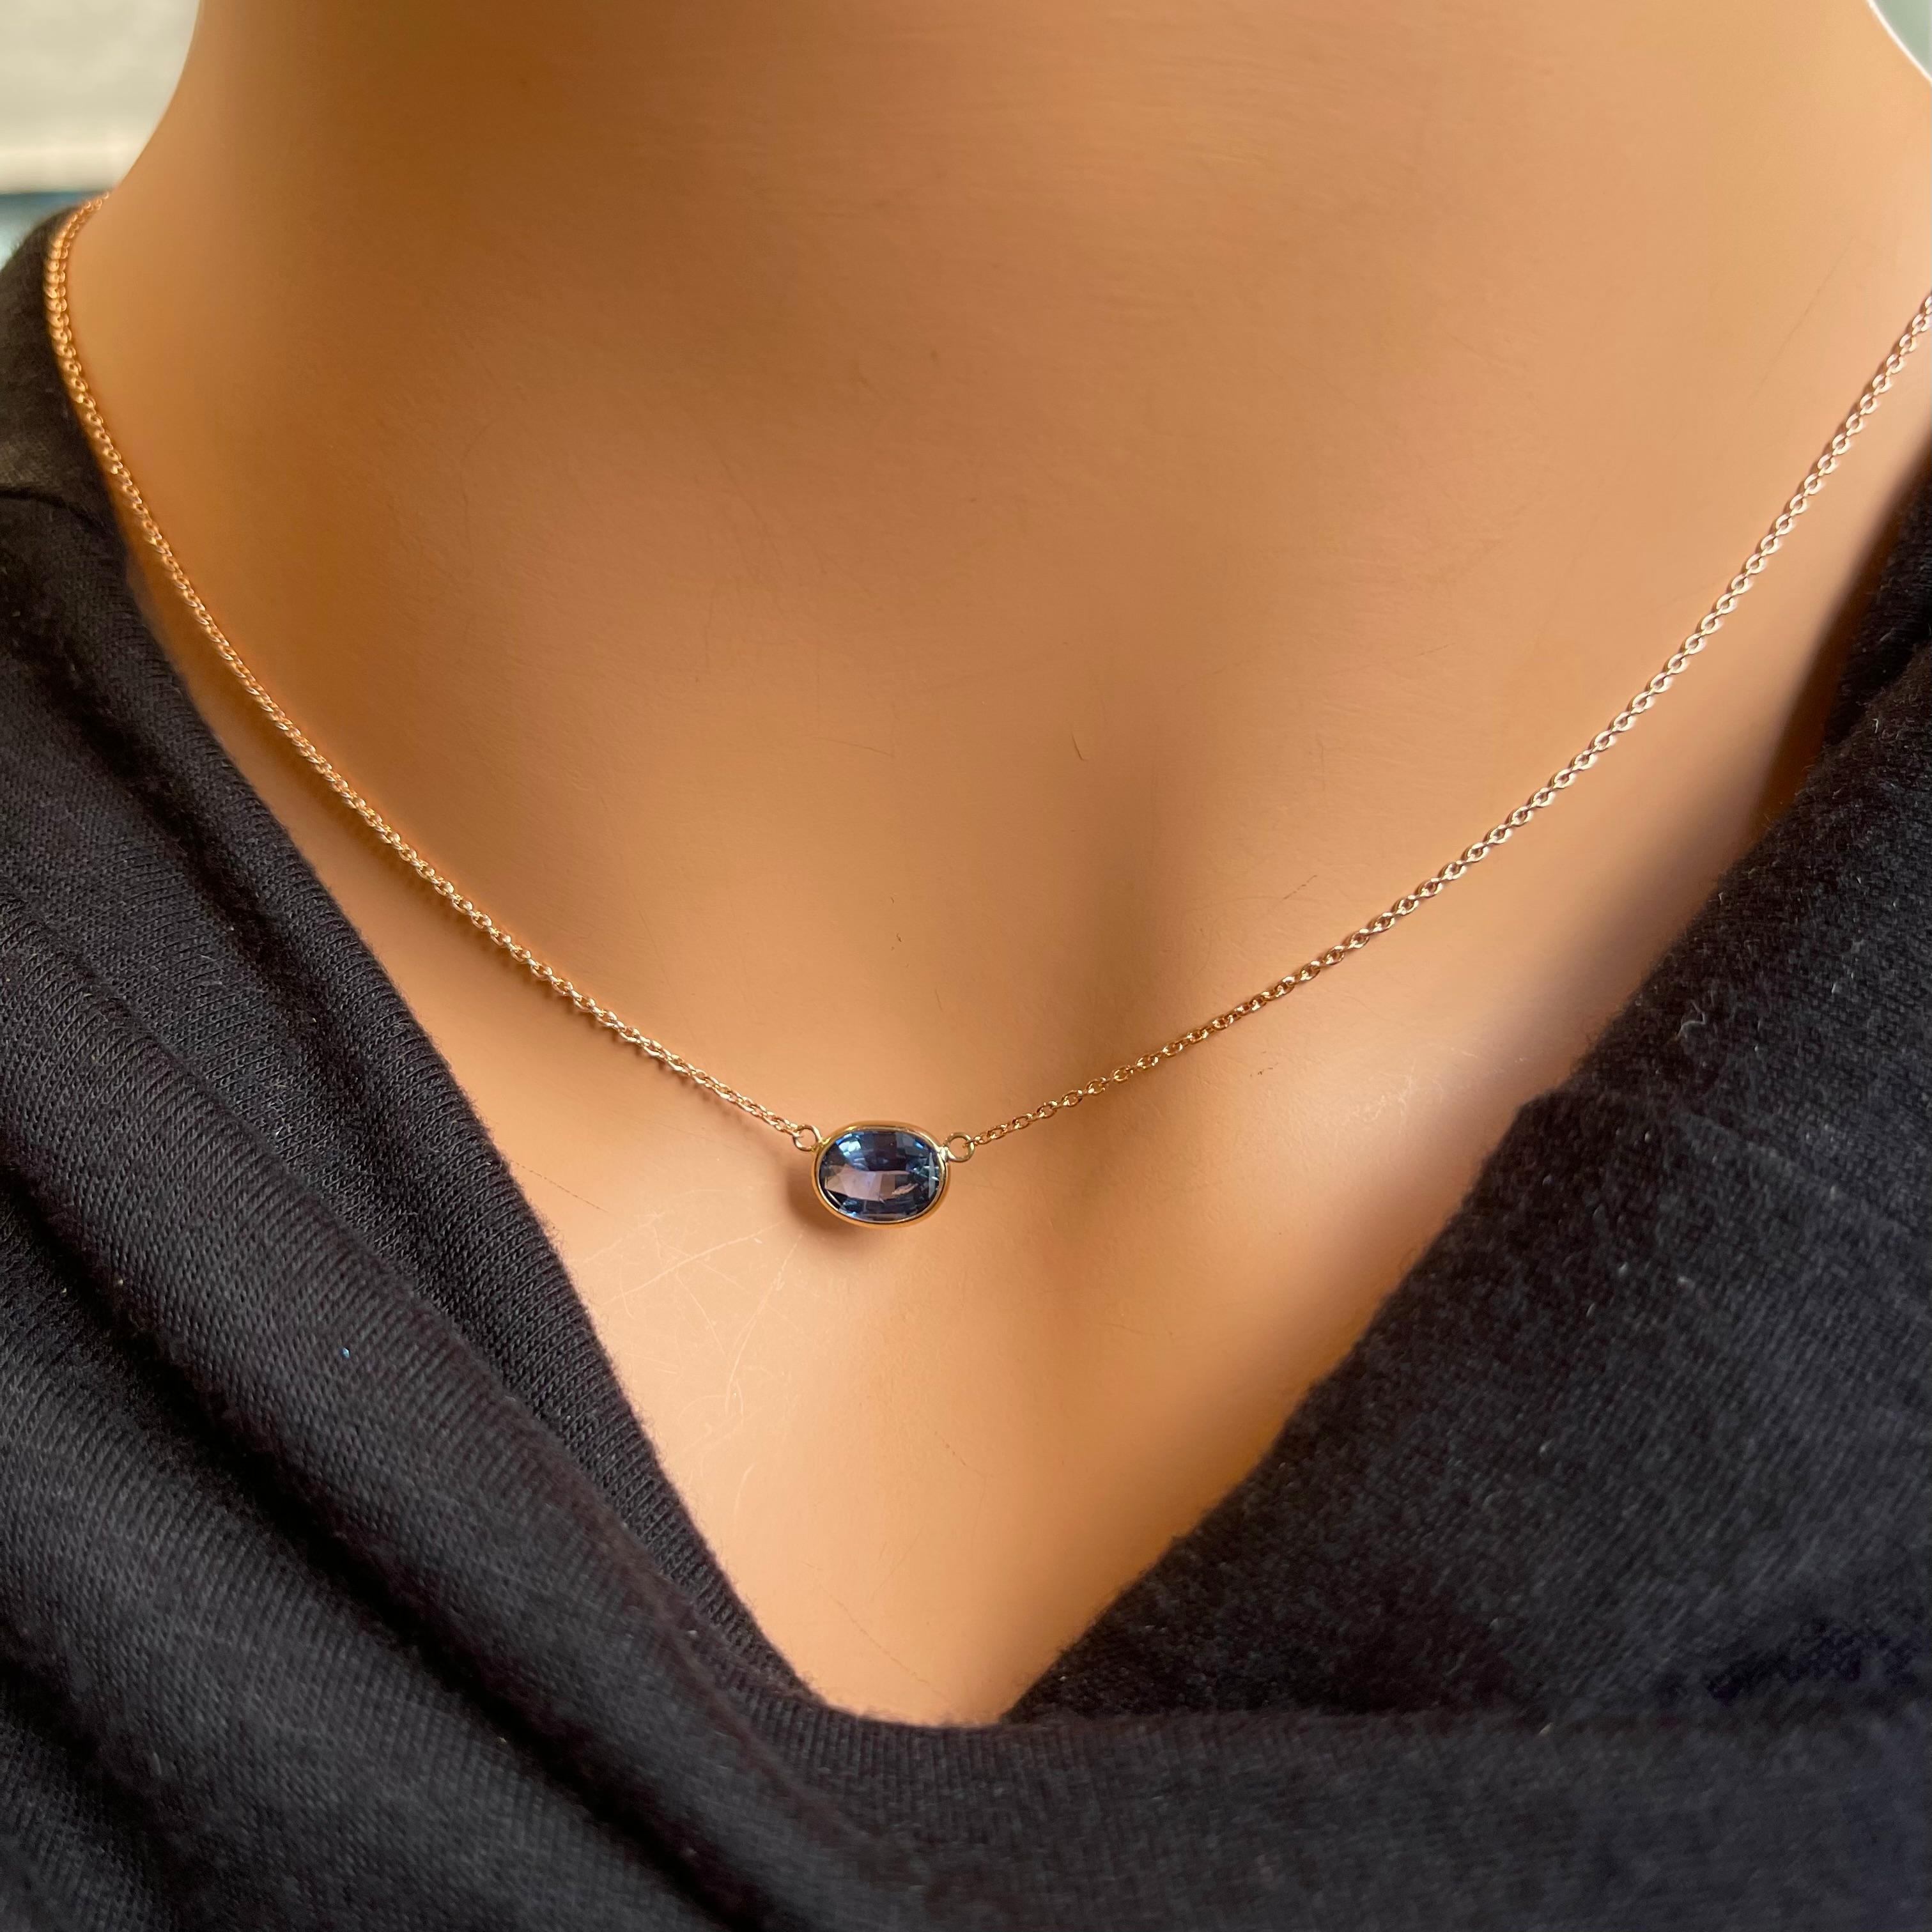 Oval Cut 1.42 Carat Sapphire Blue Oval & Fashion Necklaces In 14K Rose Gold For Sale